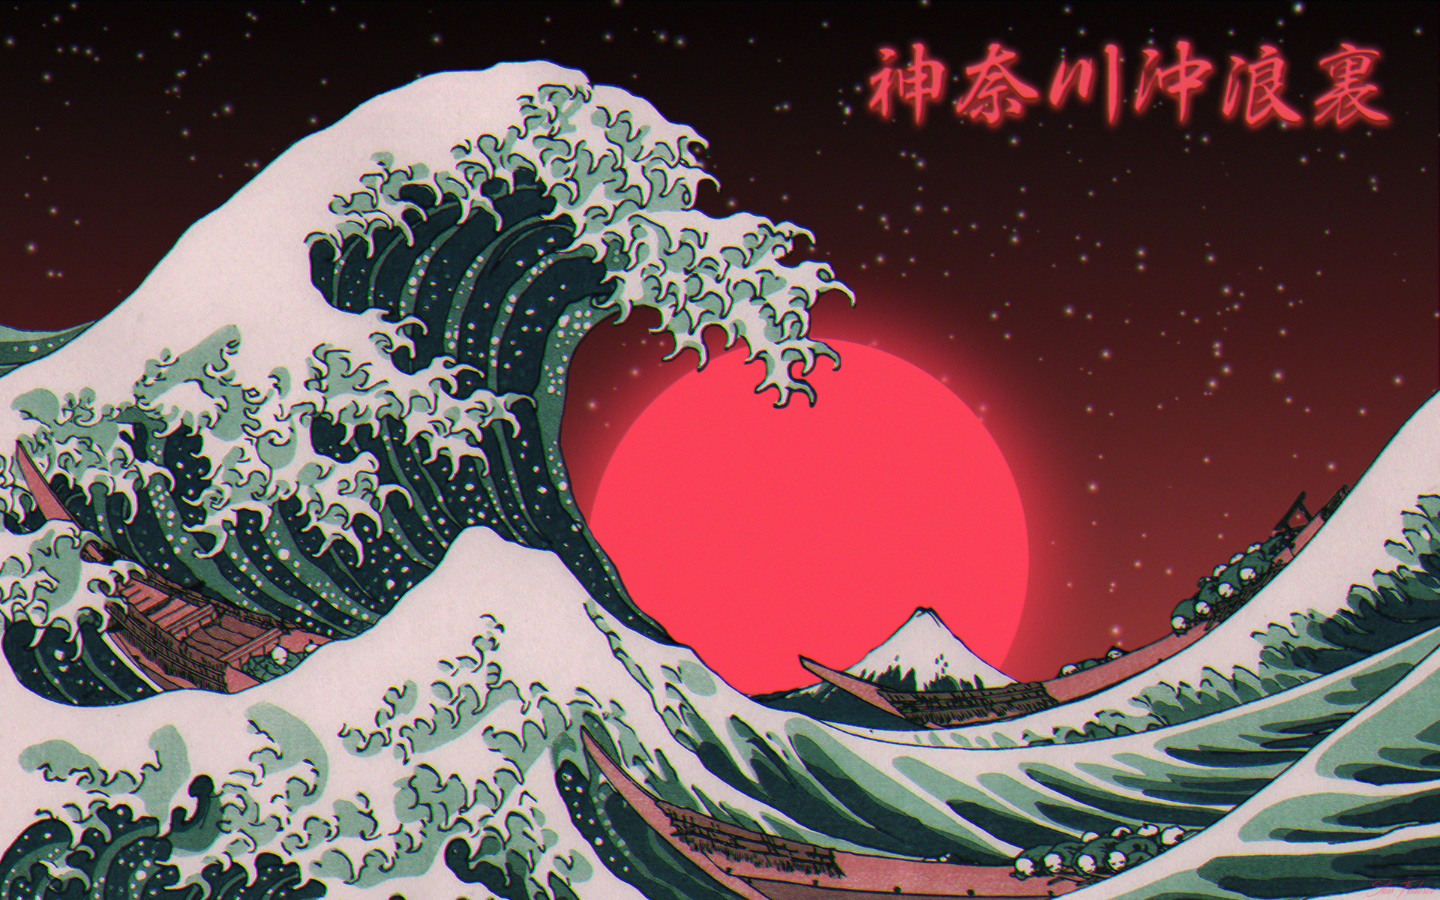 Anime 1440x900 waves synthwave The Great Wave of Kanagawa water Japanese